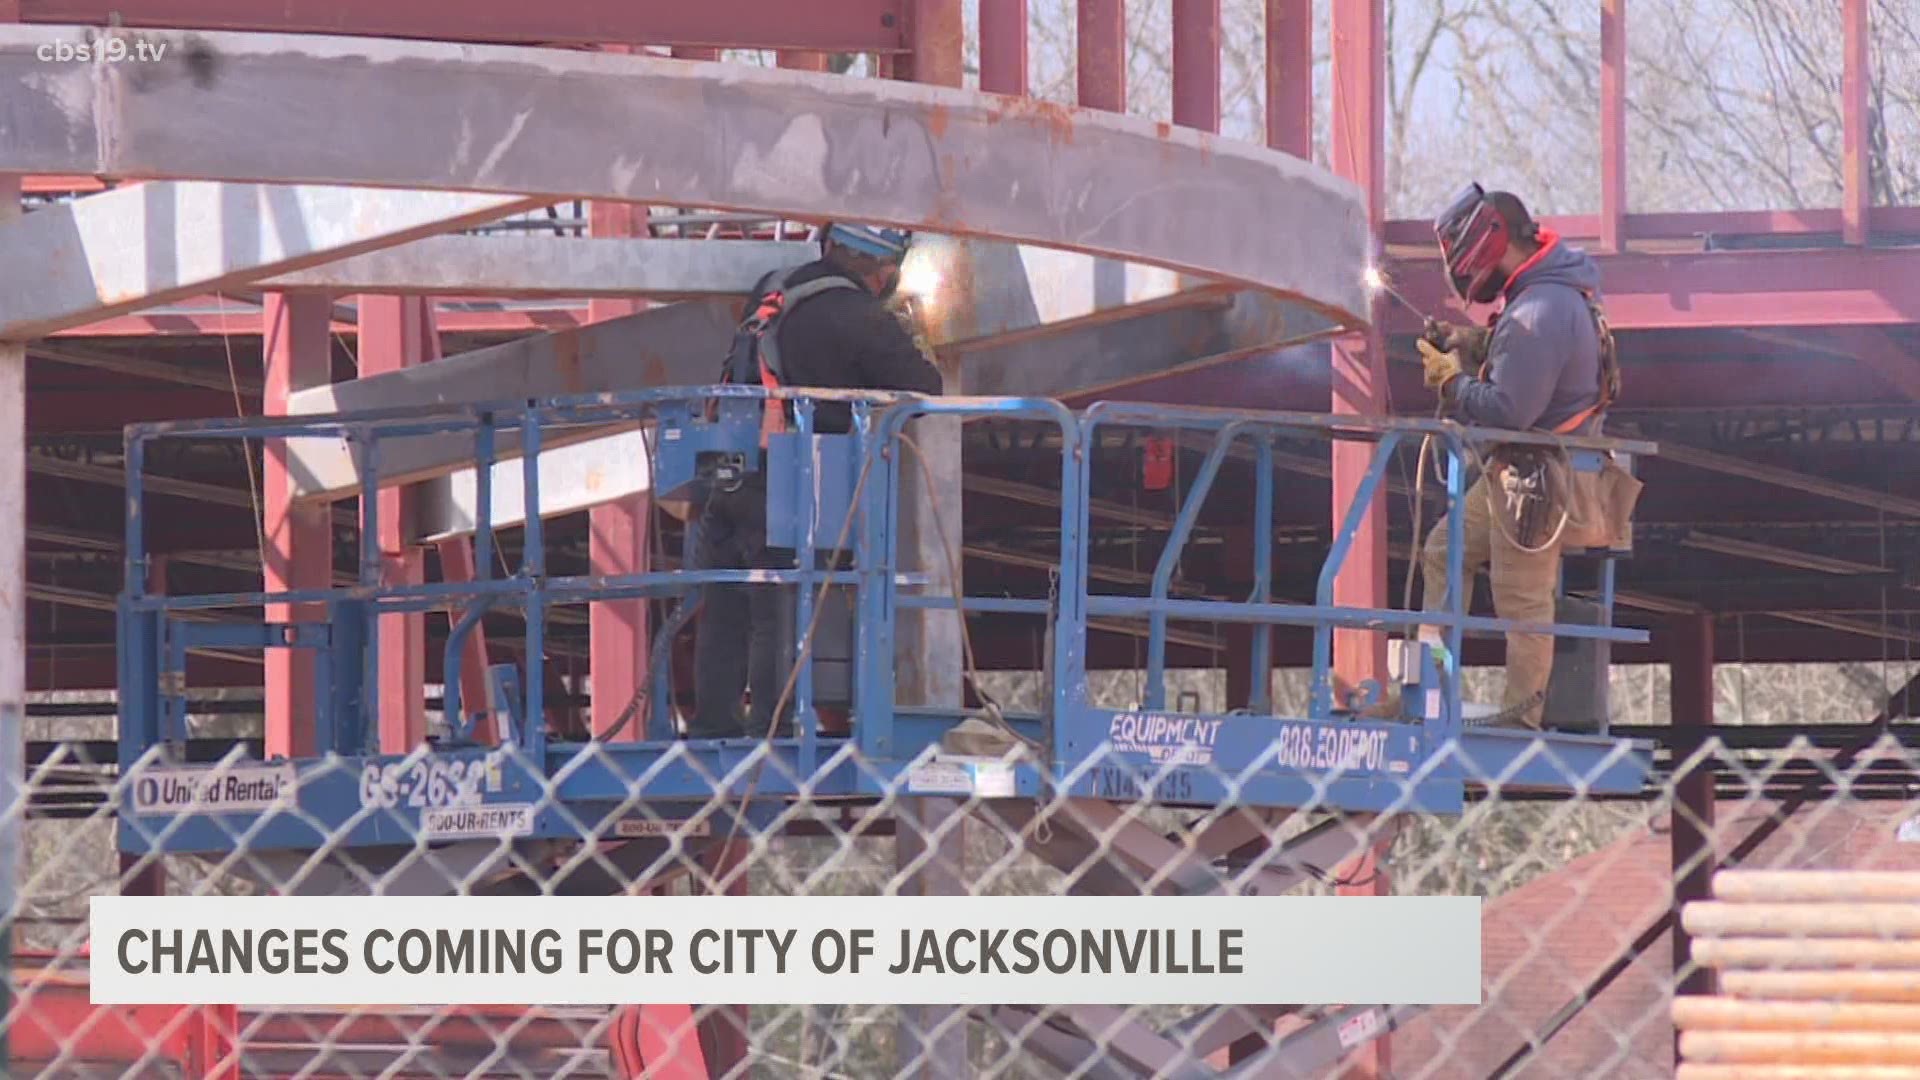 Construction can be spotted going on across the City of Jacksonville from new businesses, restaurants, to the Public Safety Complex and more.